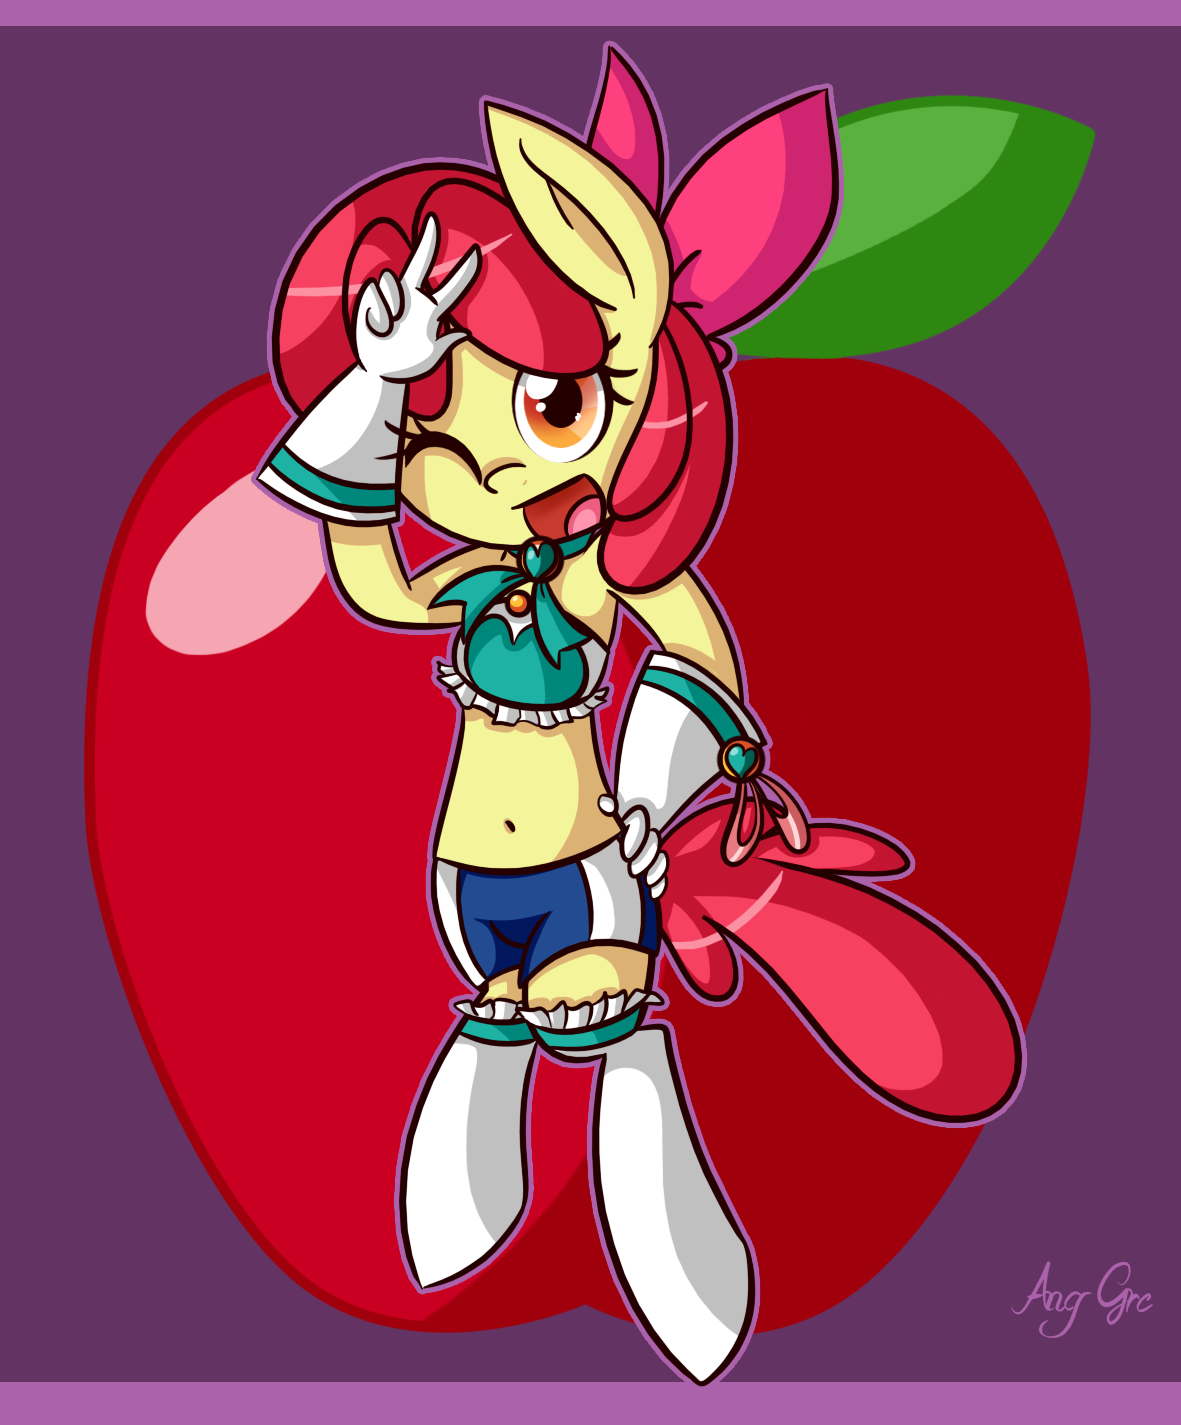 1181px x 1425px - Equestria Daily - MLP Stuff!: Animation: Apple Bloomers - Magic Crusaders  in a Pinch